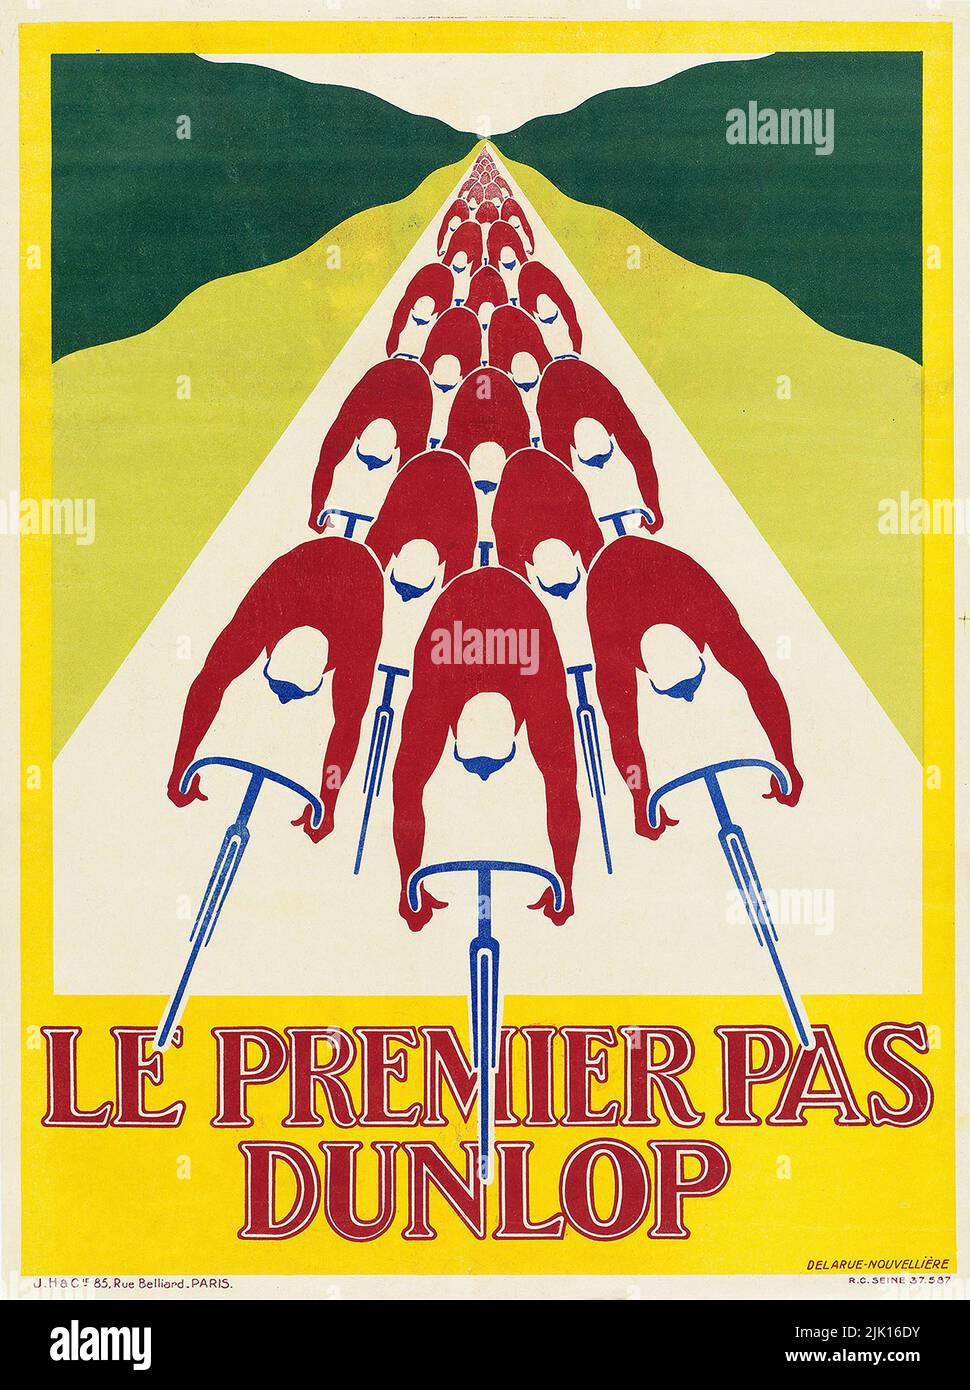 Vintage French Cycling Poster - LE PREMIER PAS DUNLOP . Stockfoto